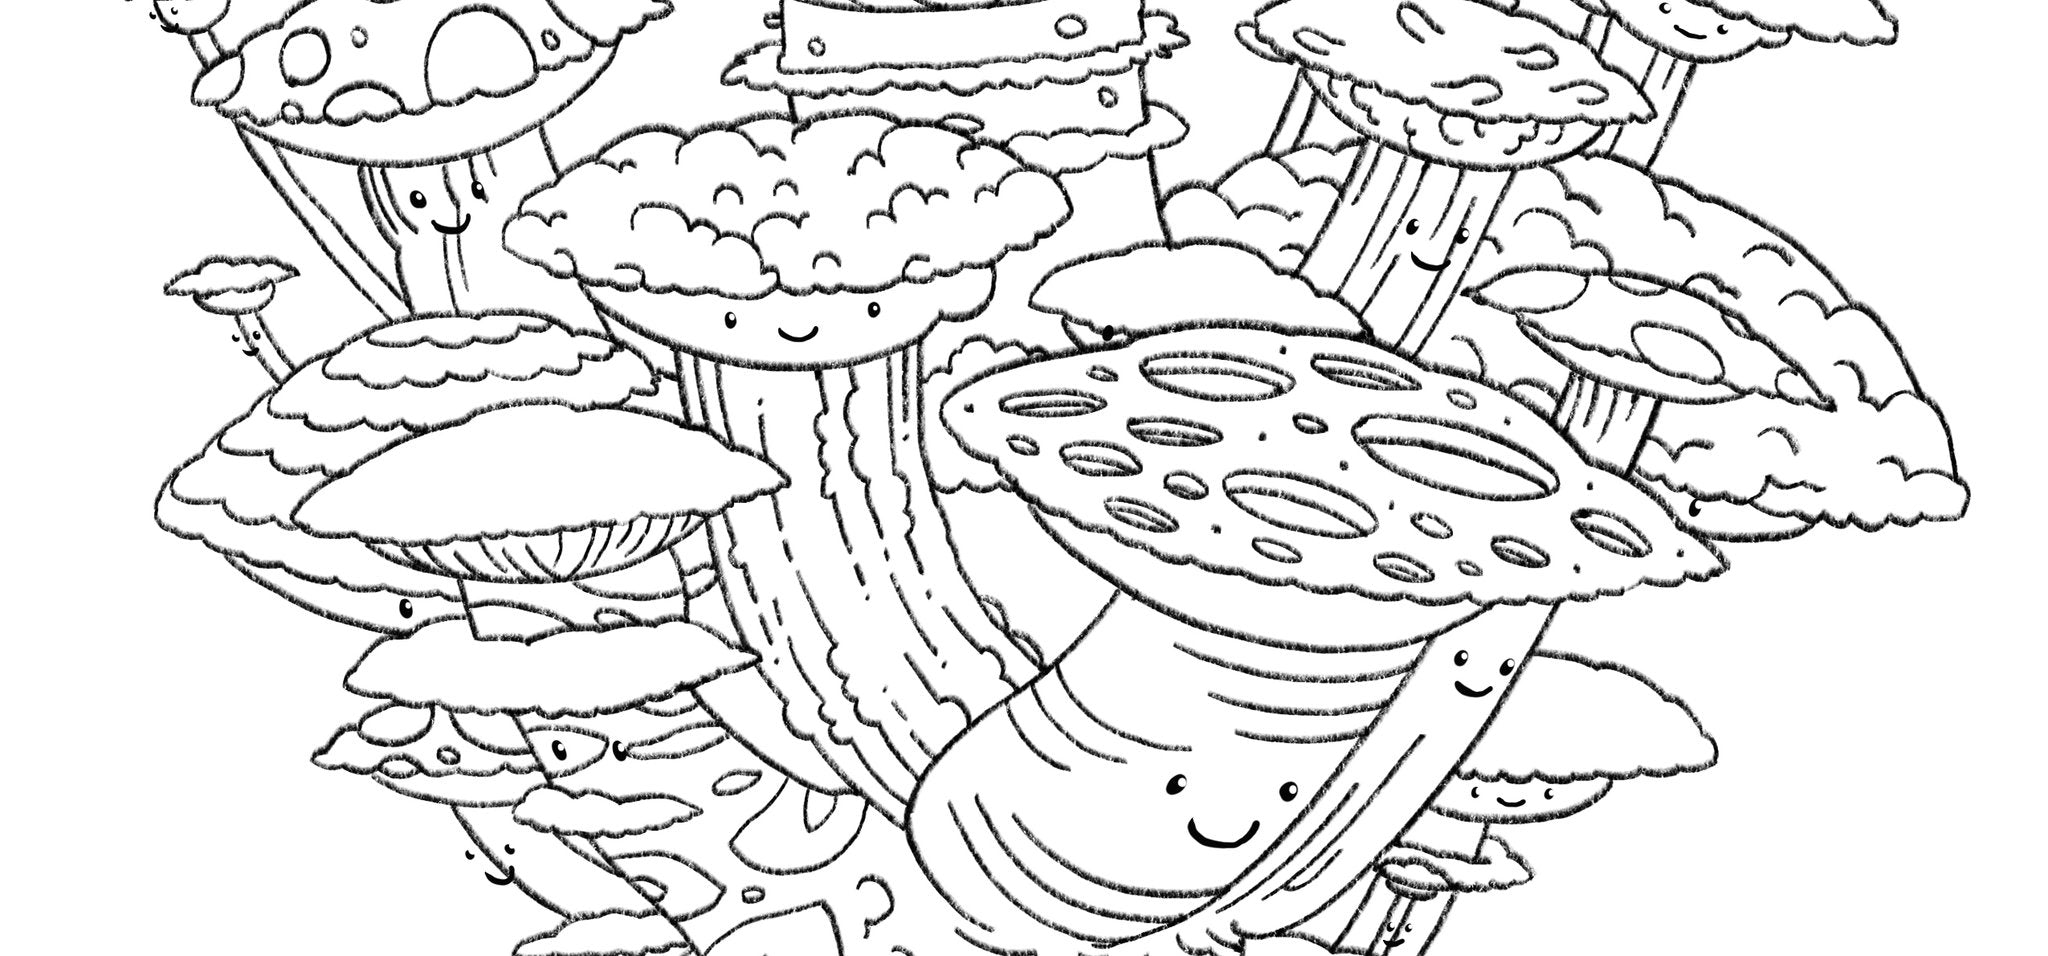 Space Shrooms Coloring Page | Saturday Morning Cartoons